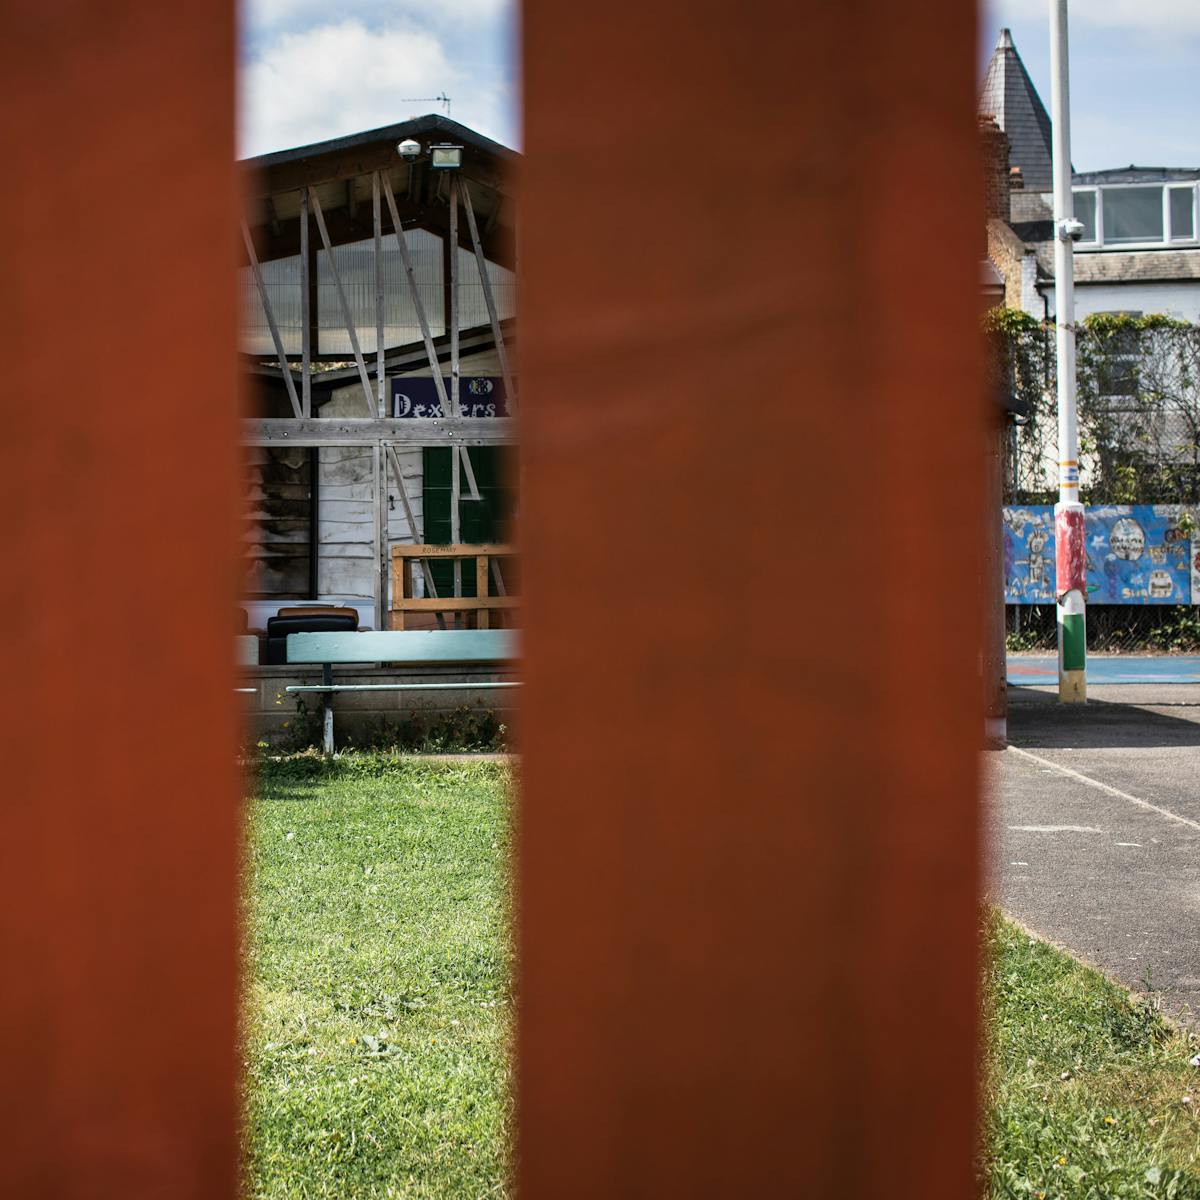 Photograph of an adventure playground, taken through a vertical slatted wooden fence. The vertical fence panels obscure much of the view, but through the gap are glimpses of a grass area, a concrete play area and a large pitched roof community building.